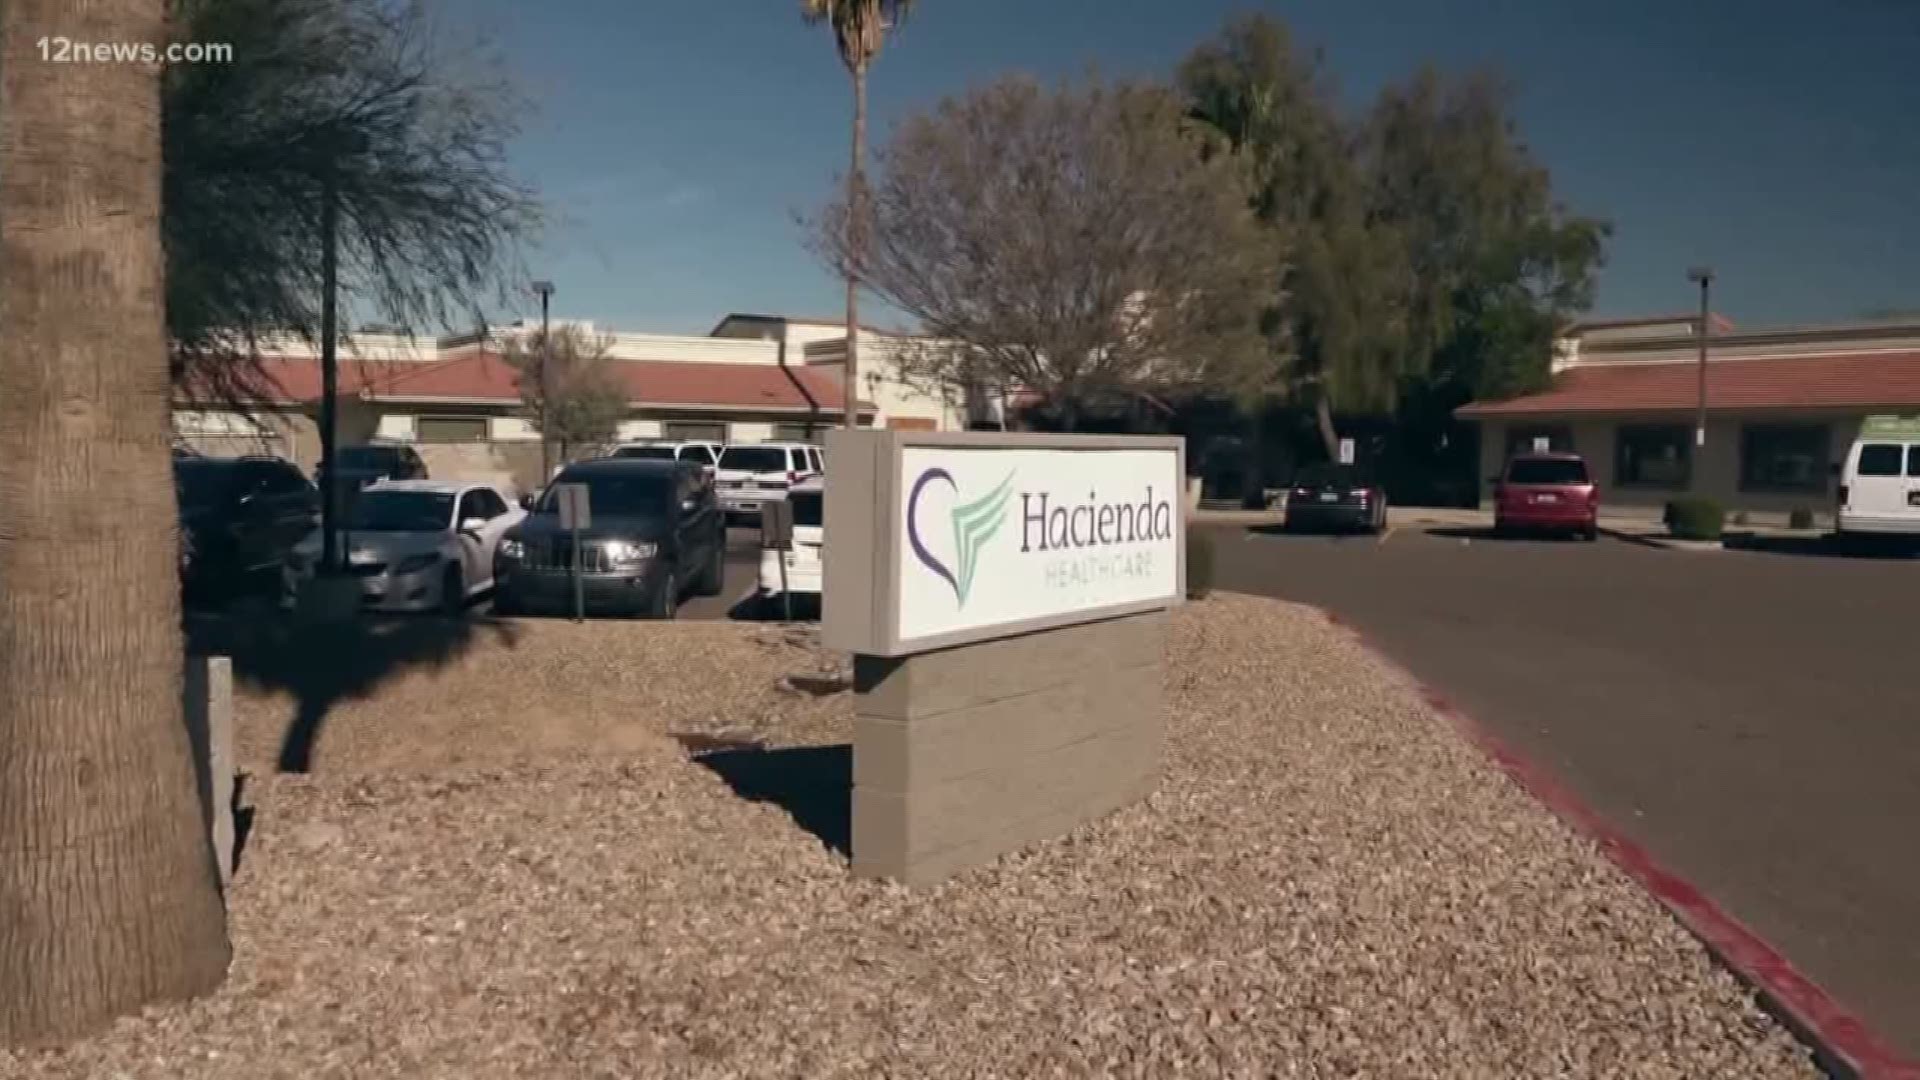 A group of family members of Hacienda Healthcare residents are sticking up for the intermediate care facility amidst allegations of abuse and neglect. The facility has come under fire recently after an incapacitated woman gave birth to a baby in December.